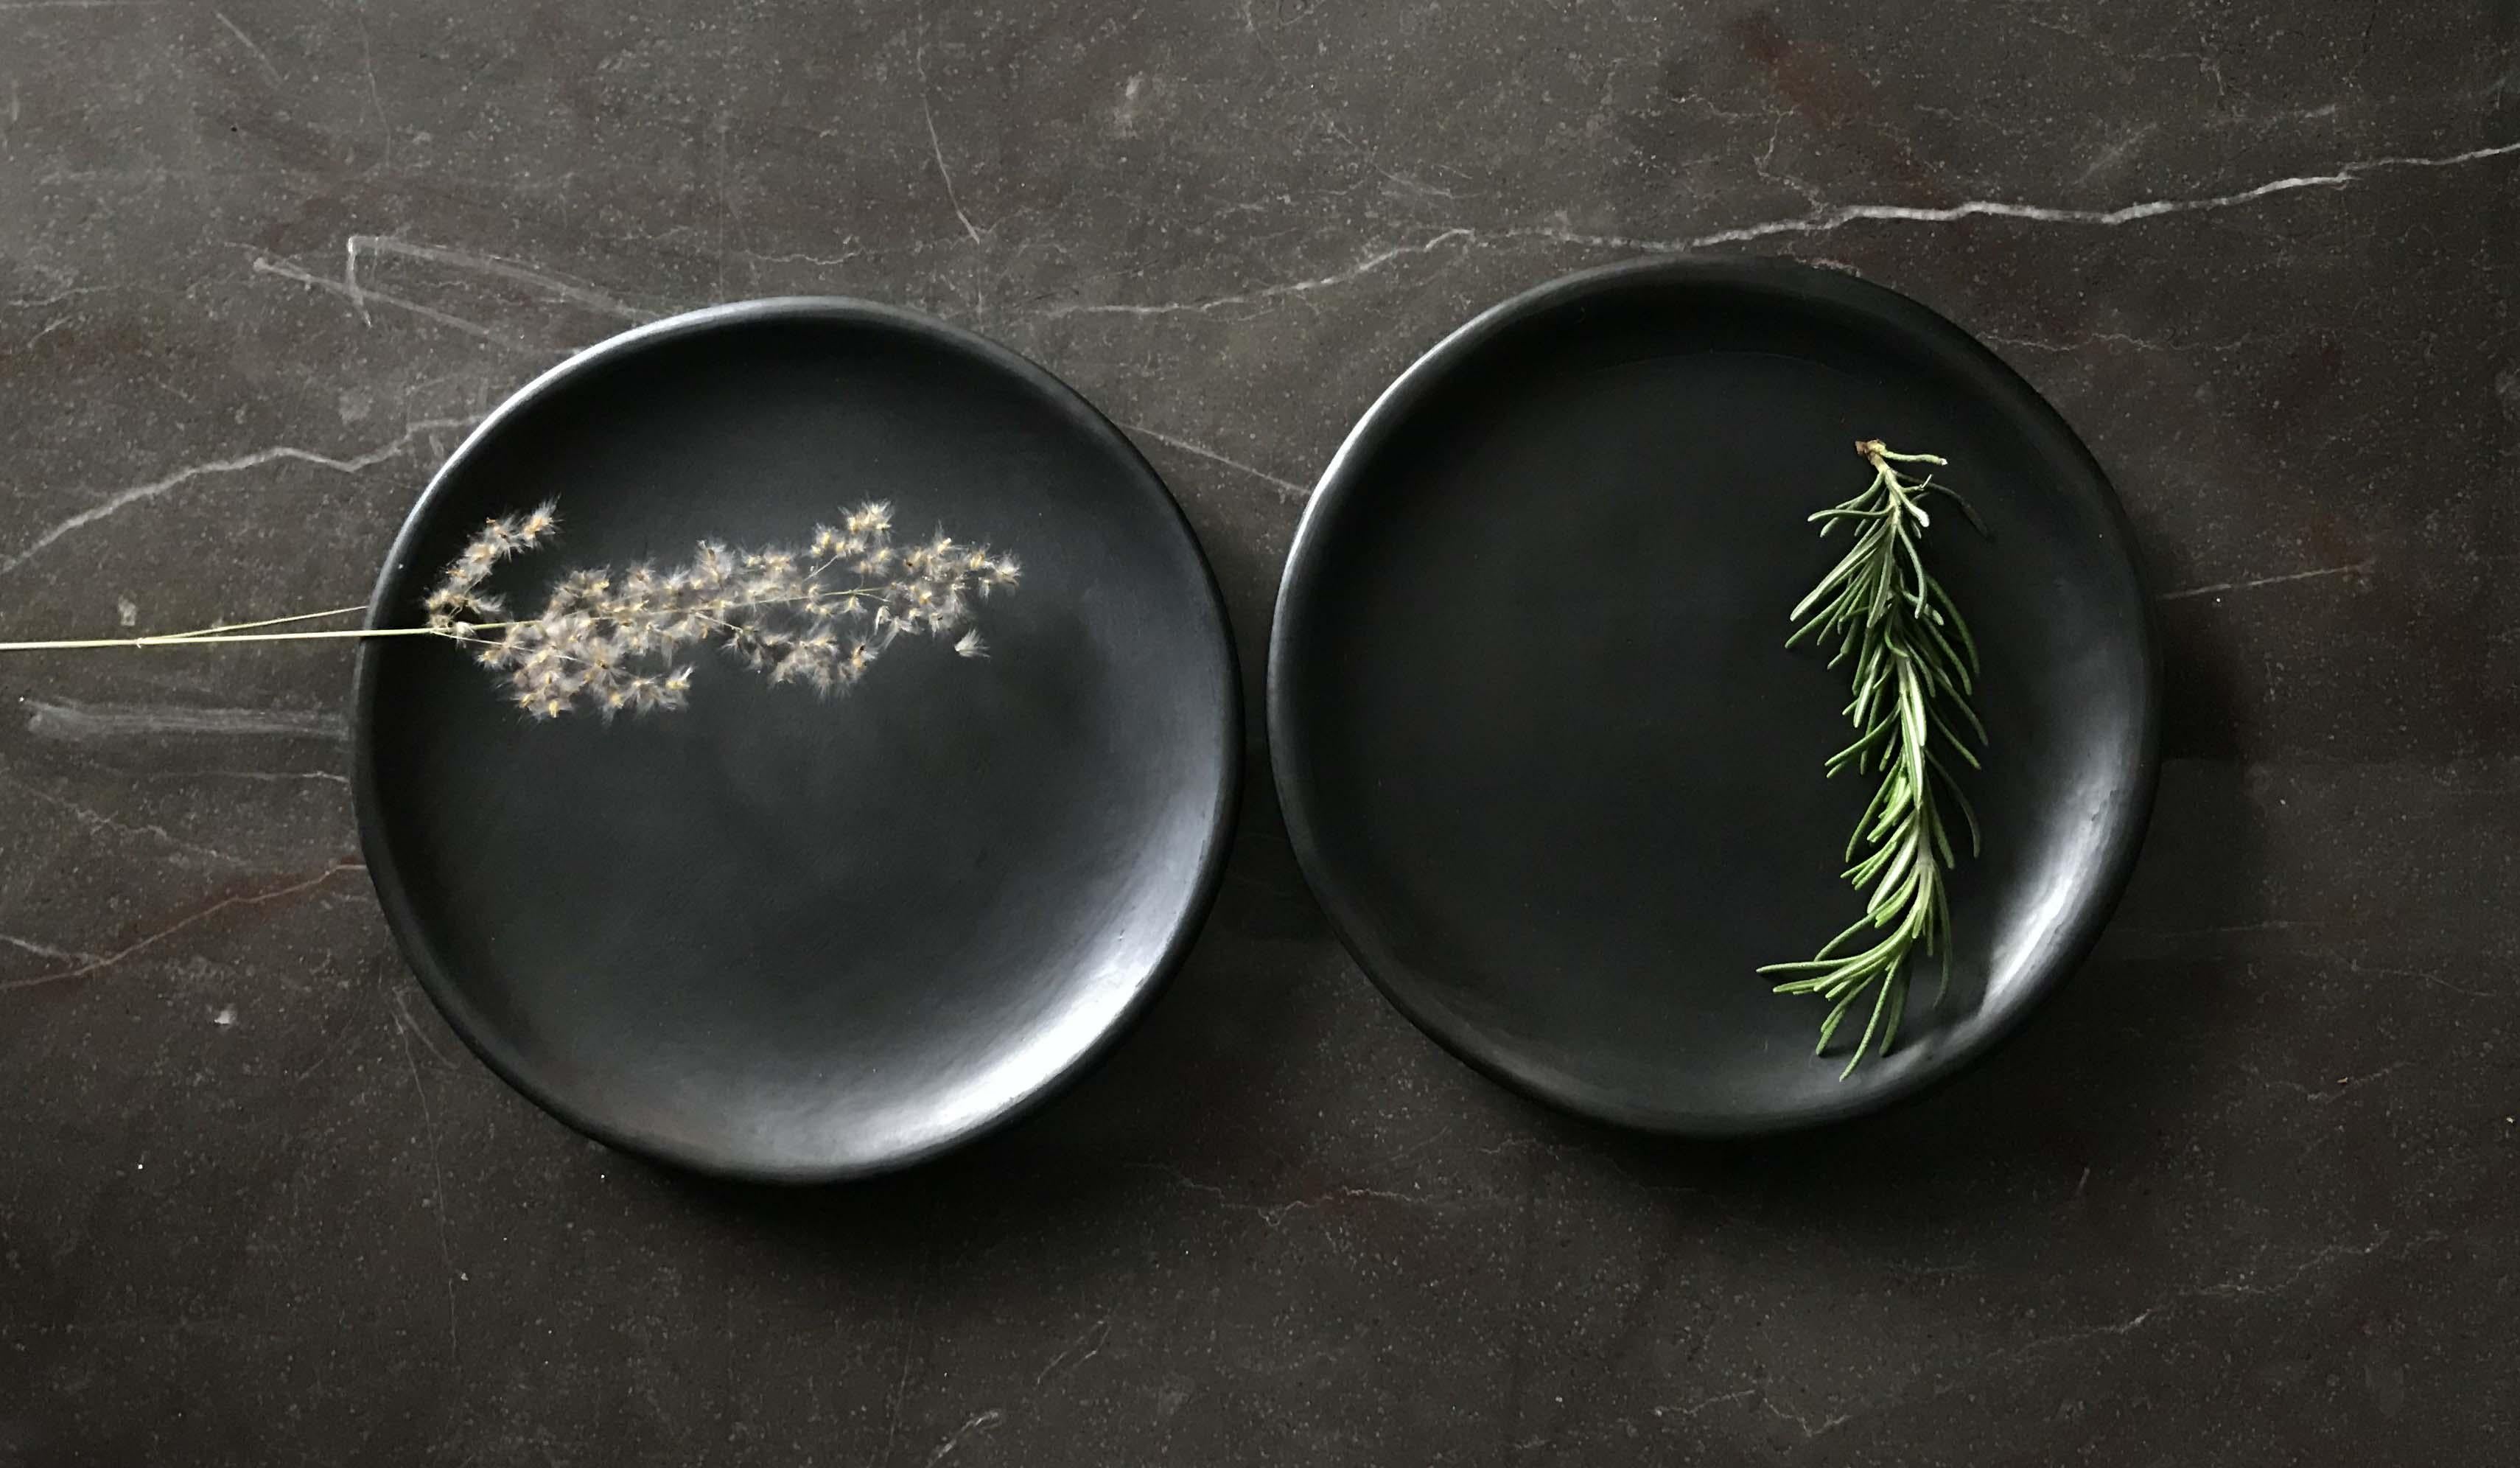 Oaxacan black clay 15cm plates handmade tableware burnished barro negro Oaxaca. Set of 2 pieces 

The soft and rich color makes this side plate a stylish partner to bread, butter or more spectacular starters.

Handmade in Oaxaca, a state rich in